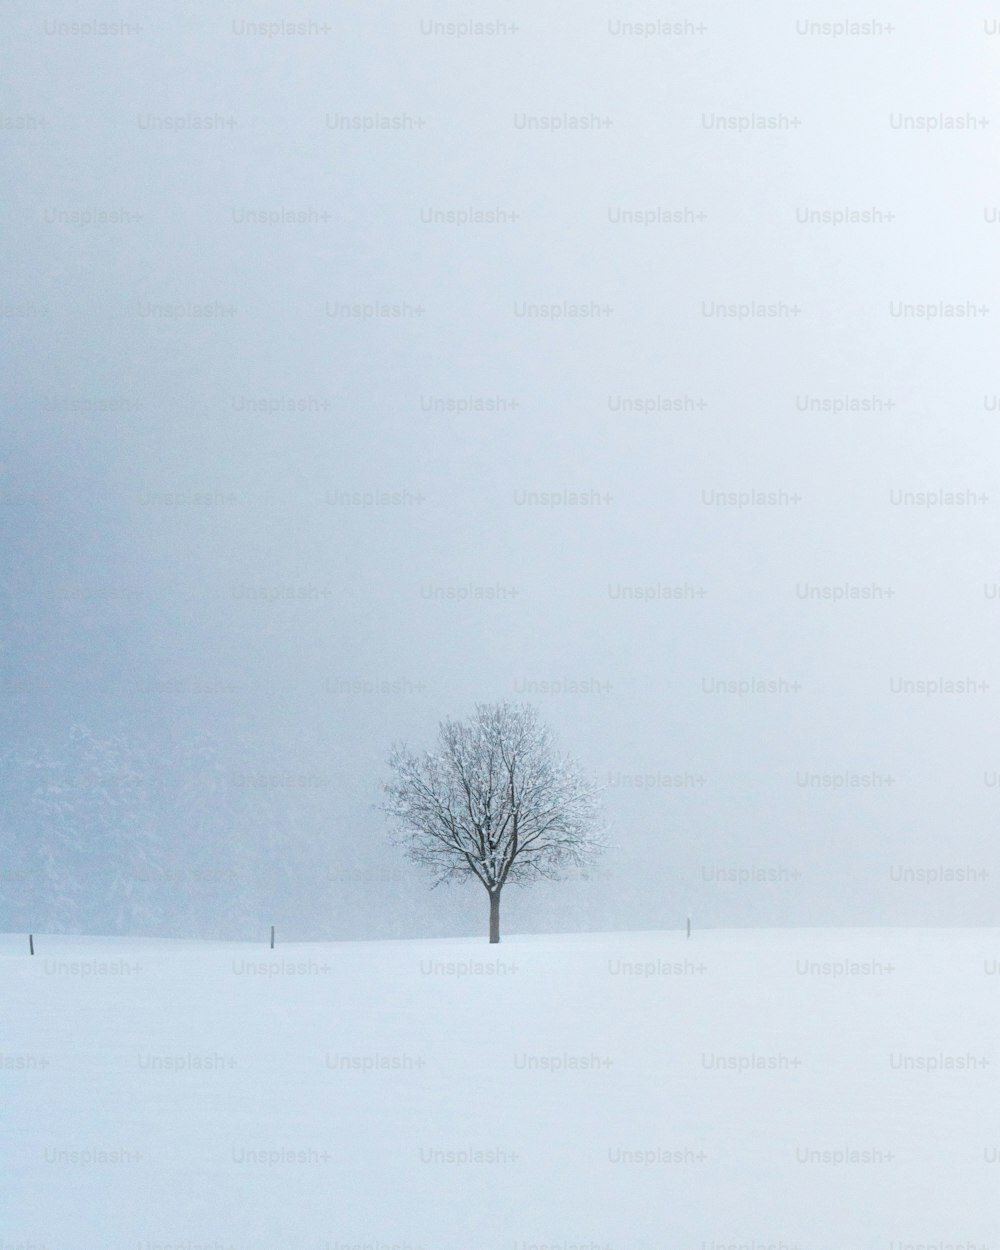 a lone tree stands alone in a snowy field